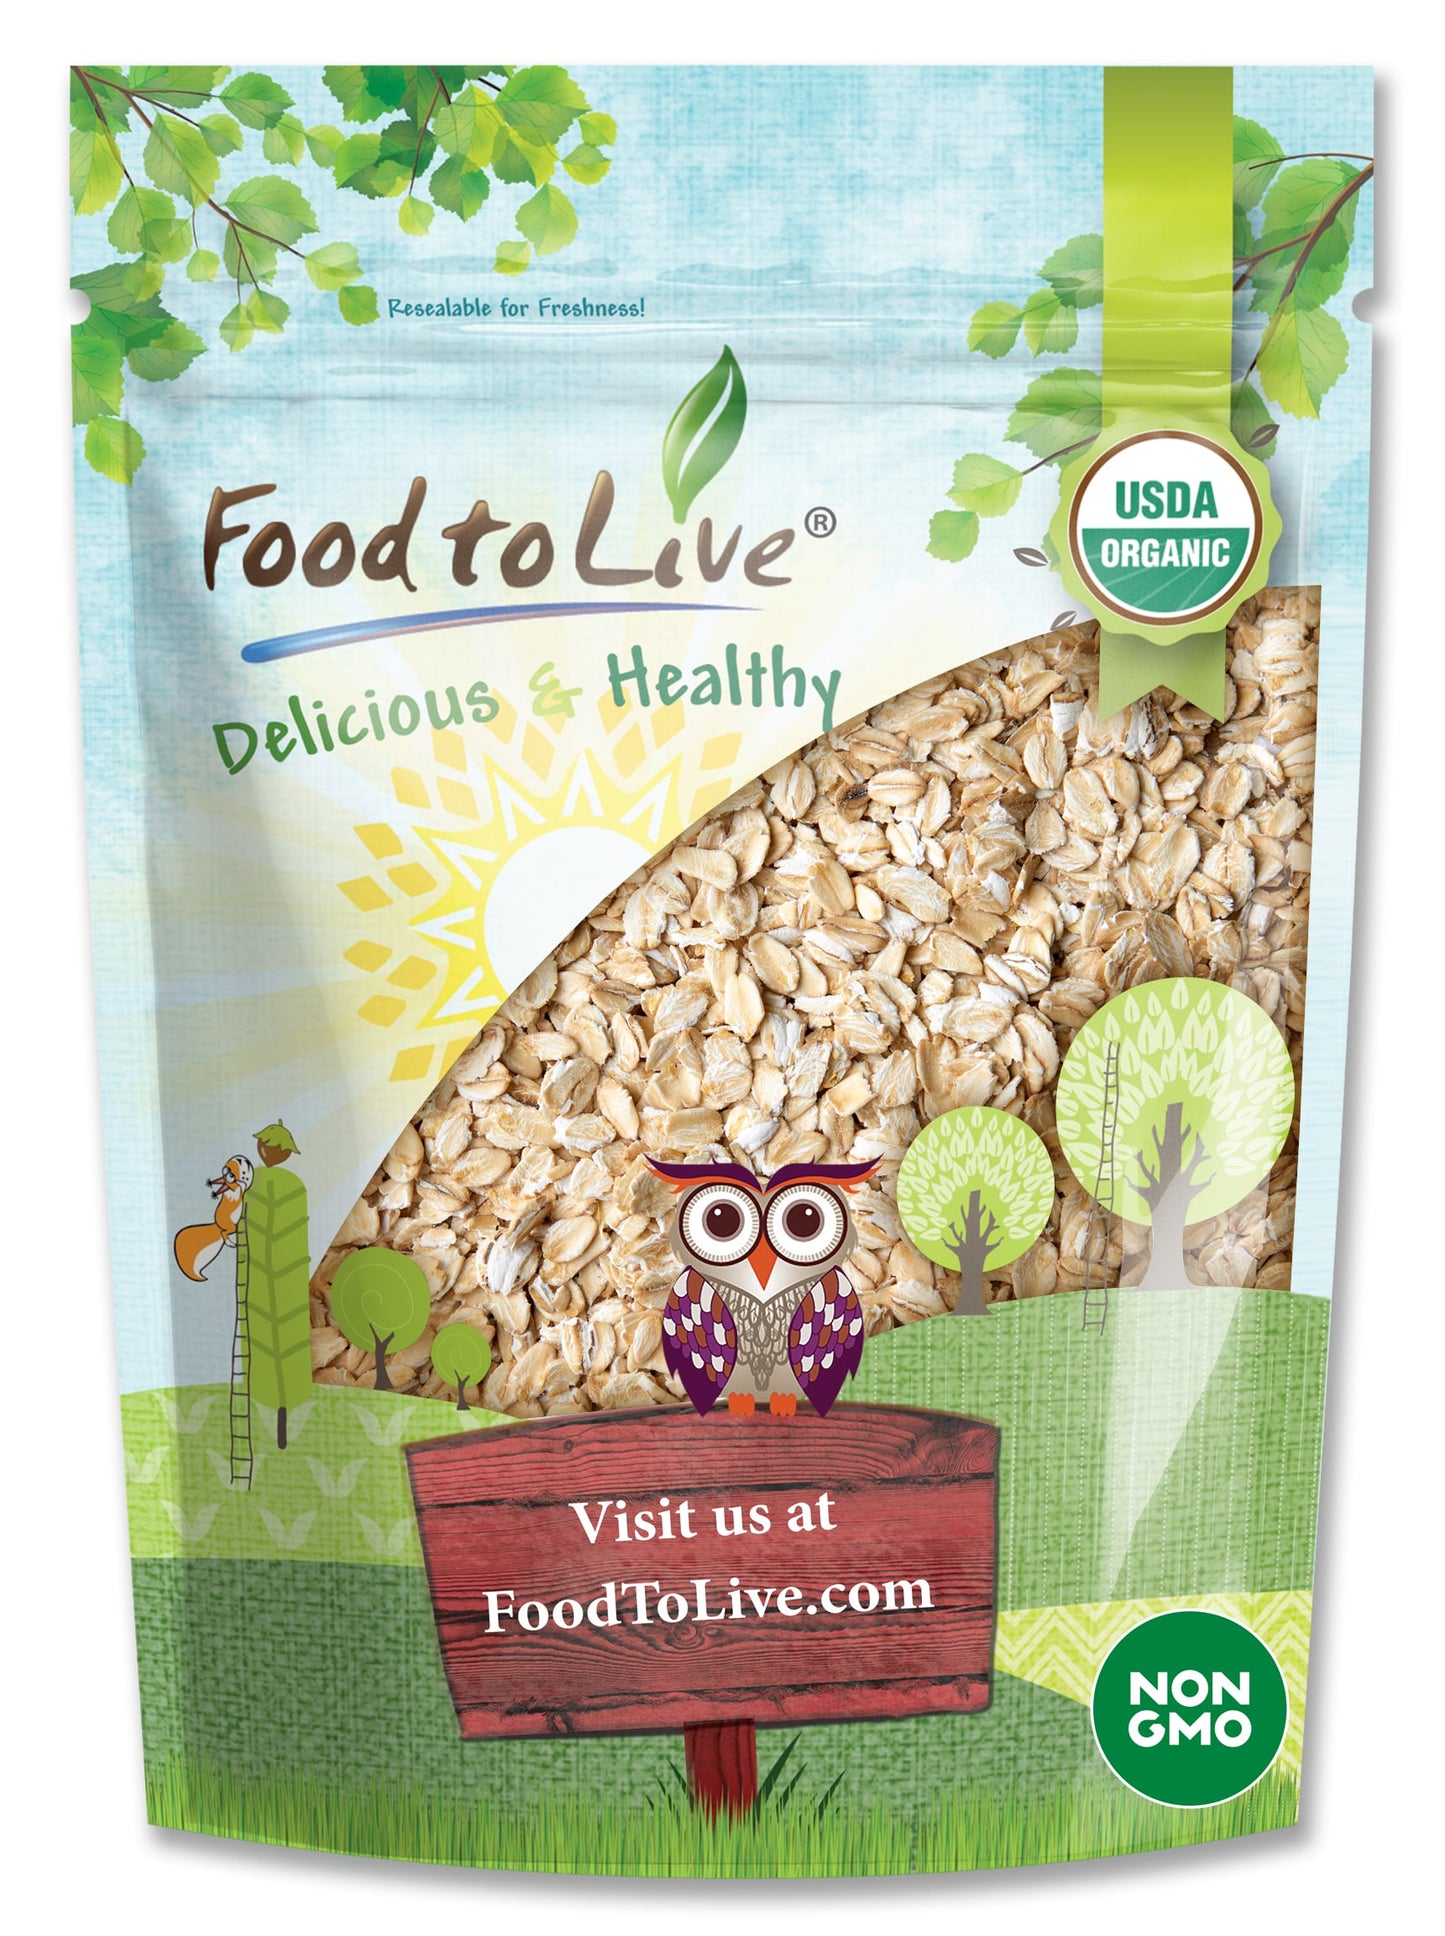 Certified Gluten Free Organic Regular Rolled Oats – Non-GMO, Old-Fashioned, 100% Whole Grain, Vegan, Bulk. Rich in Fiber. Great for Oatmeal, Cereal, Granola, Cookies. Made in USA